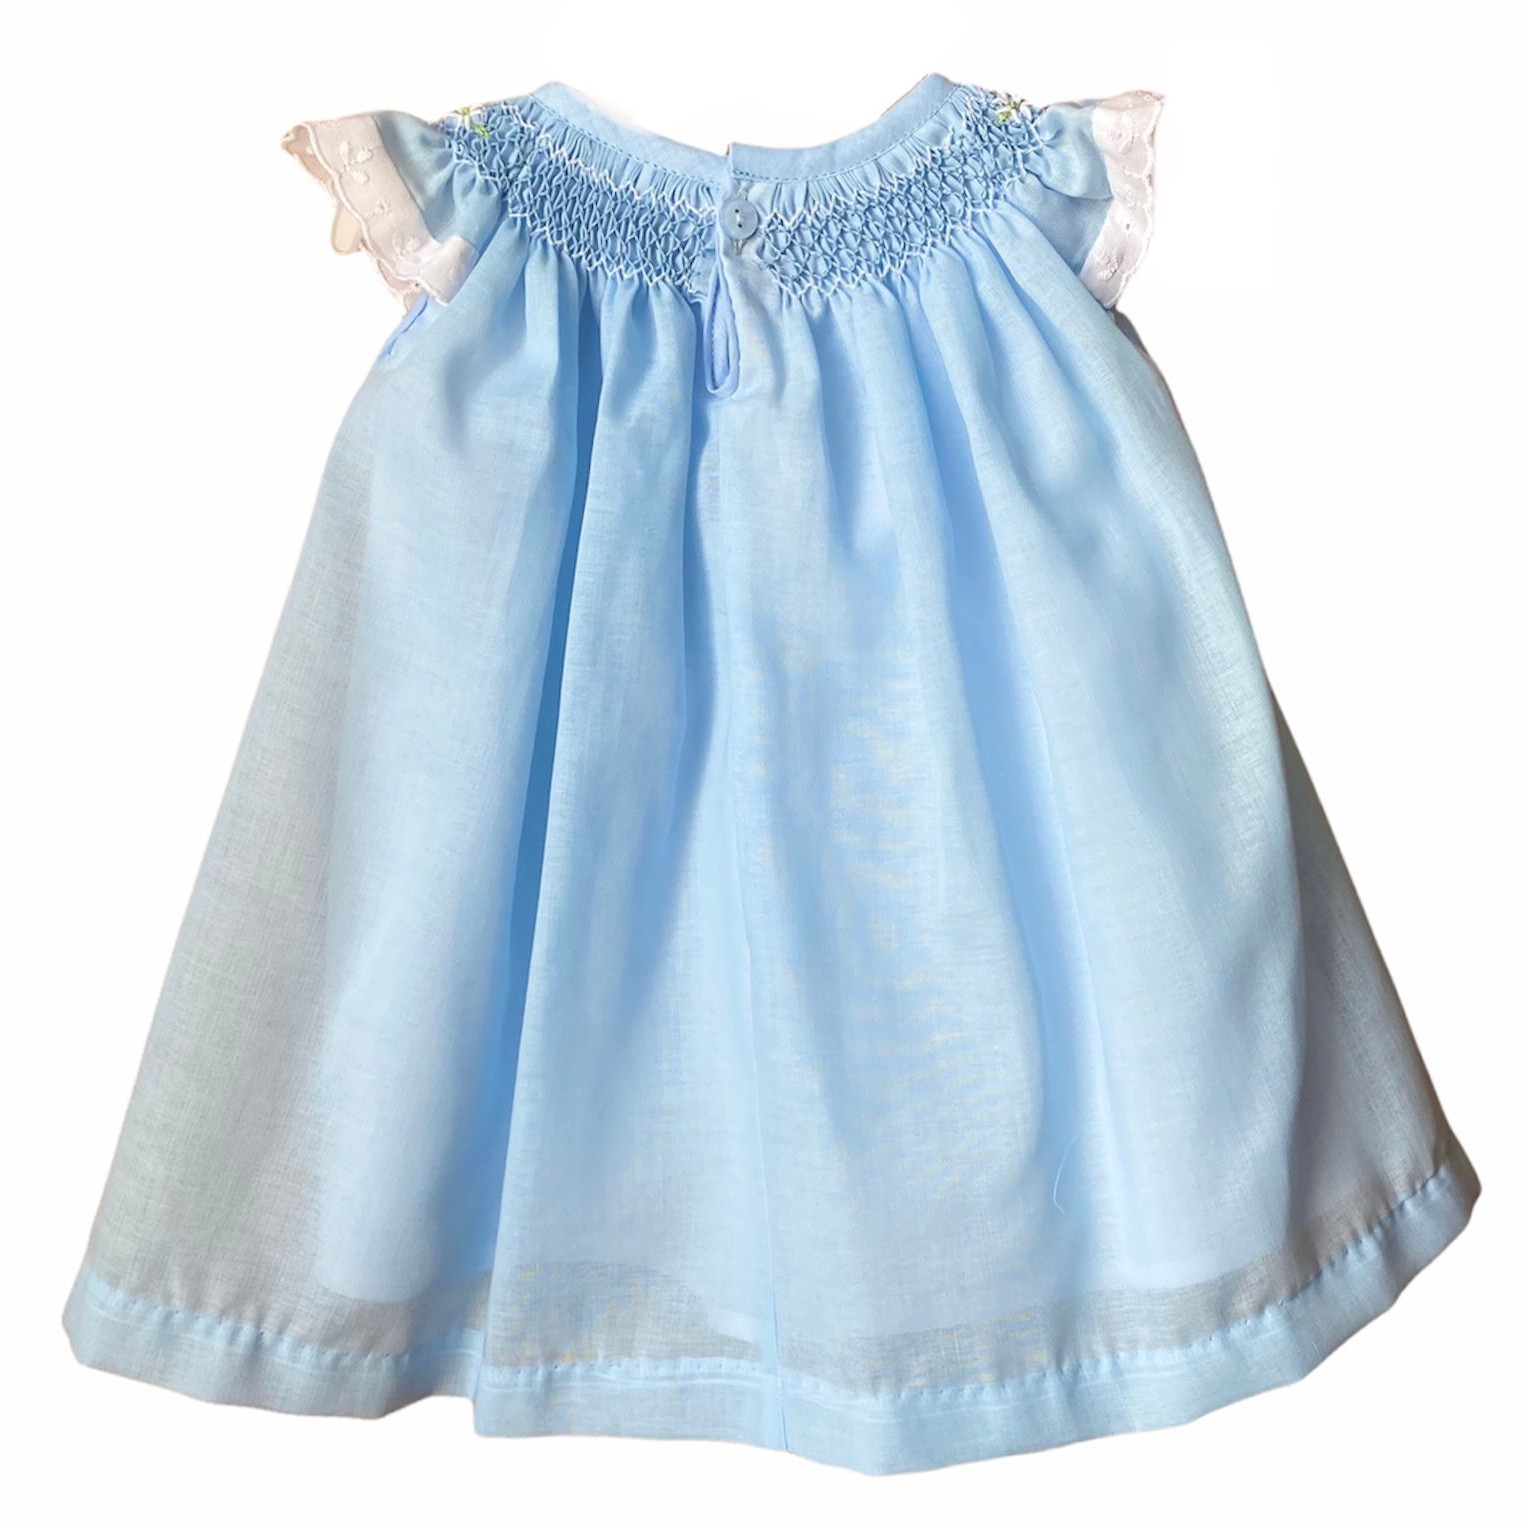 Girl's Dress with Hand Embroidery - Blue Sky Color with White Embroidery